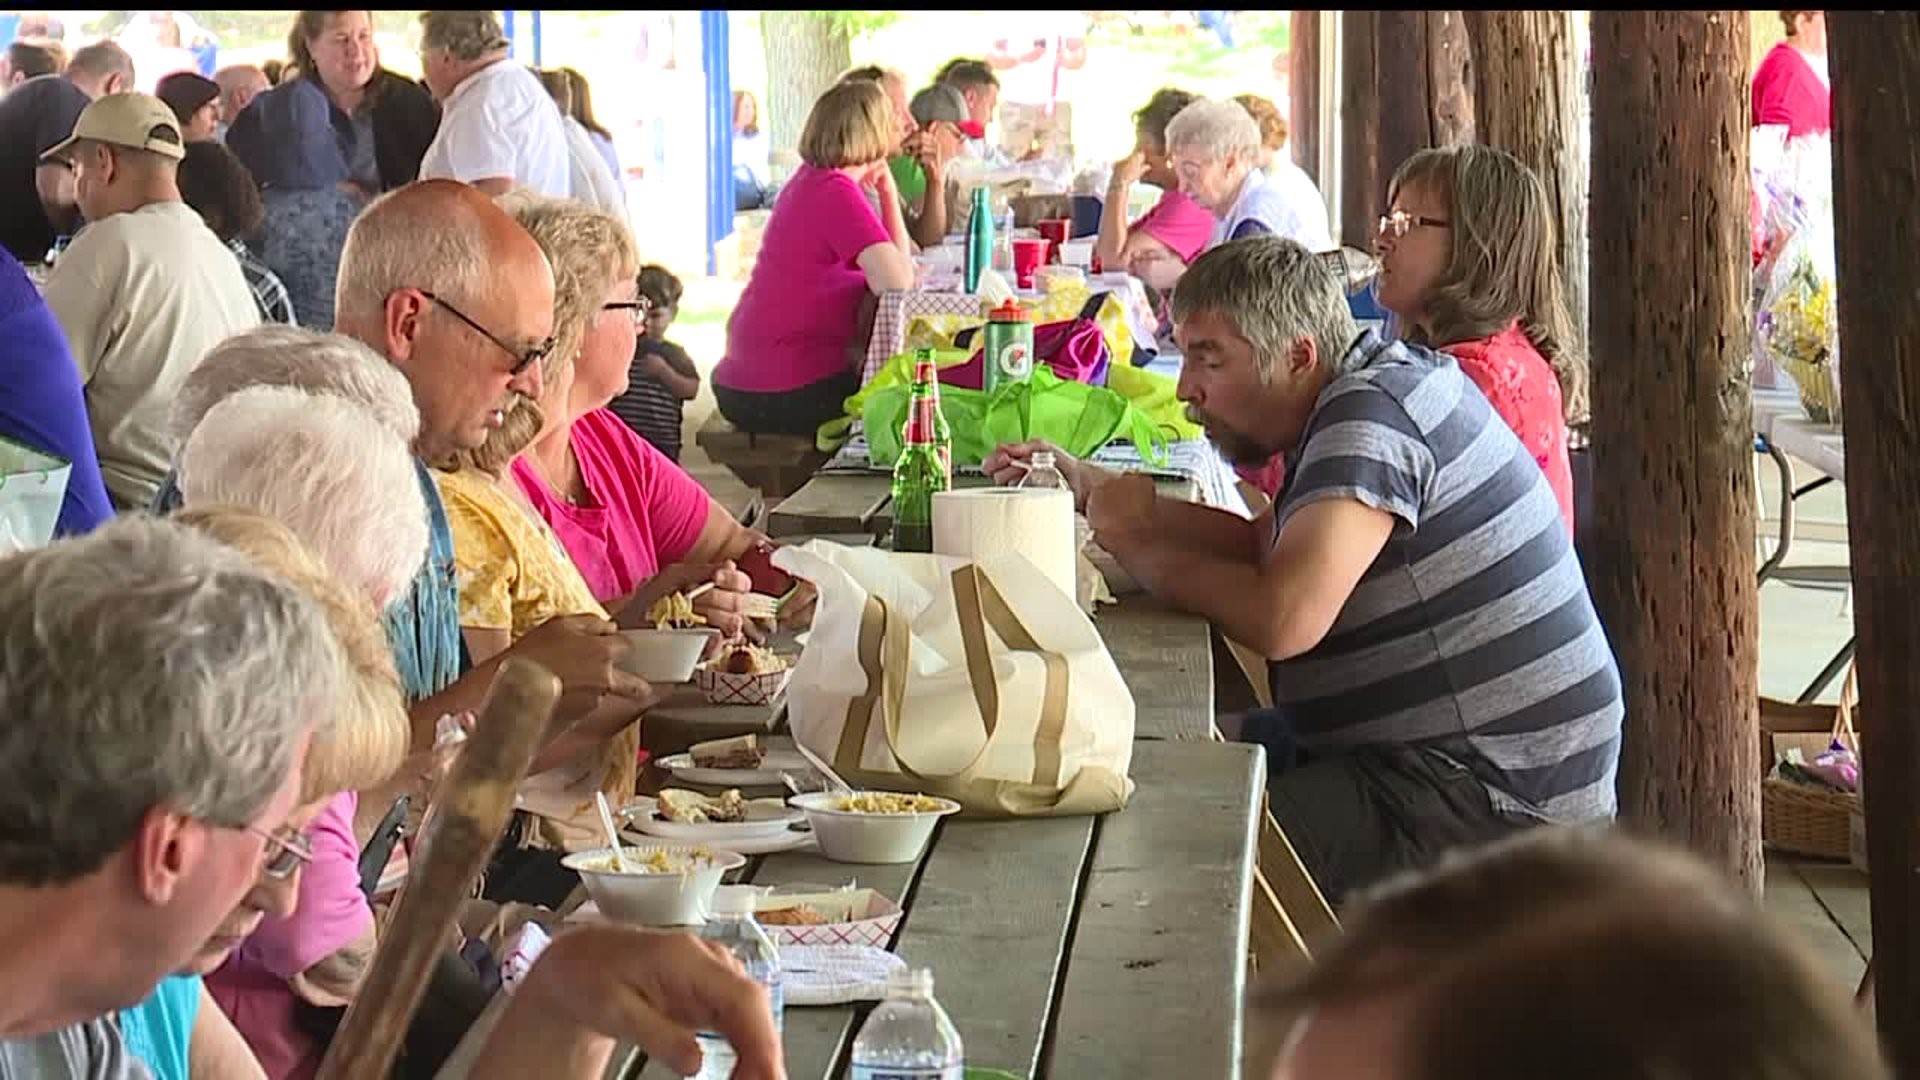 Prince of Peach Parish in Dauphin County brings community together at annual picnic